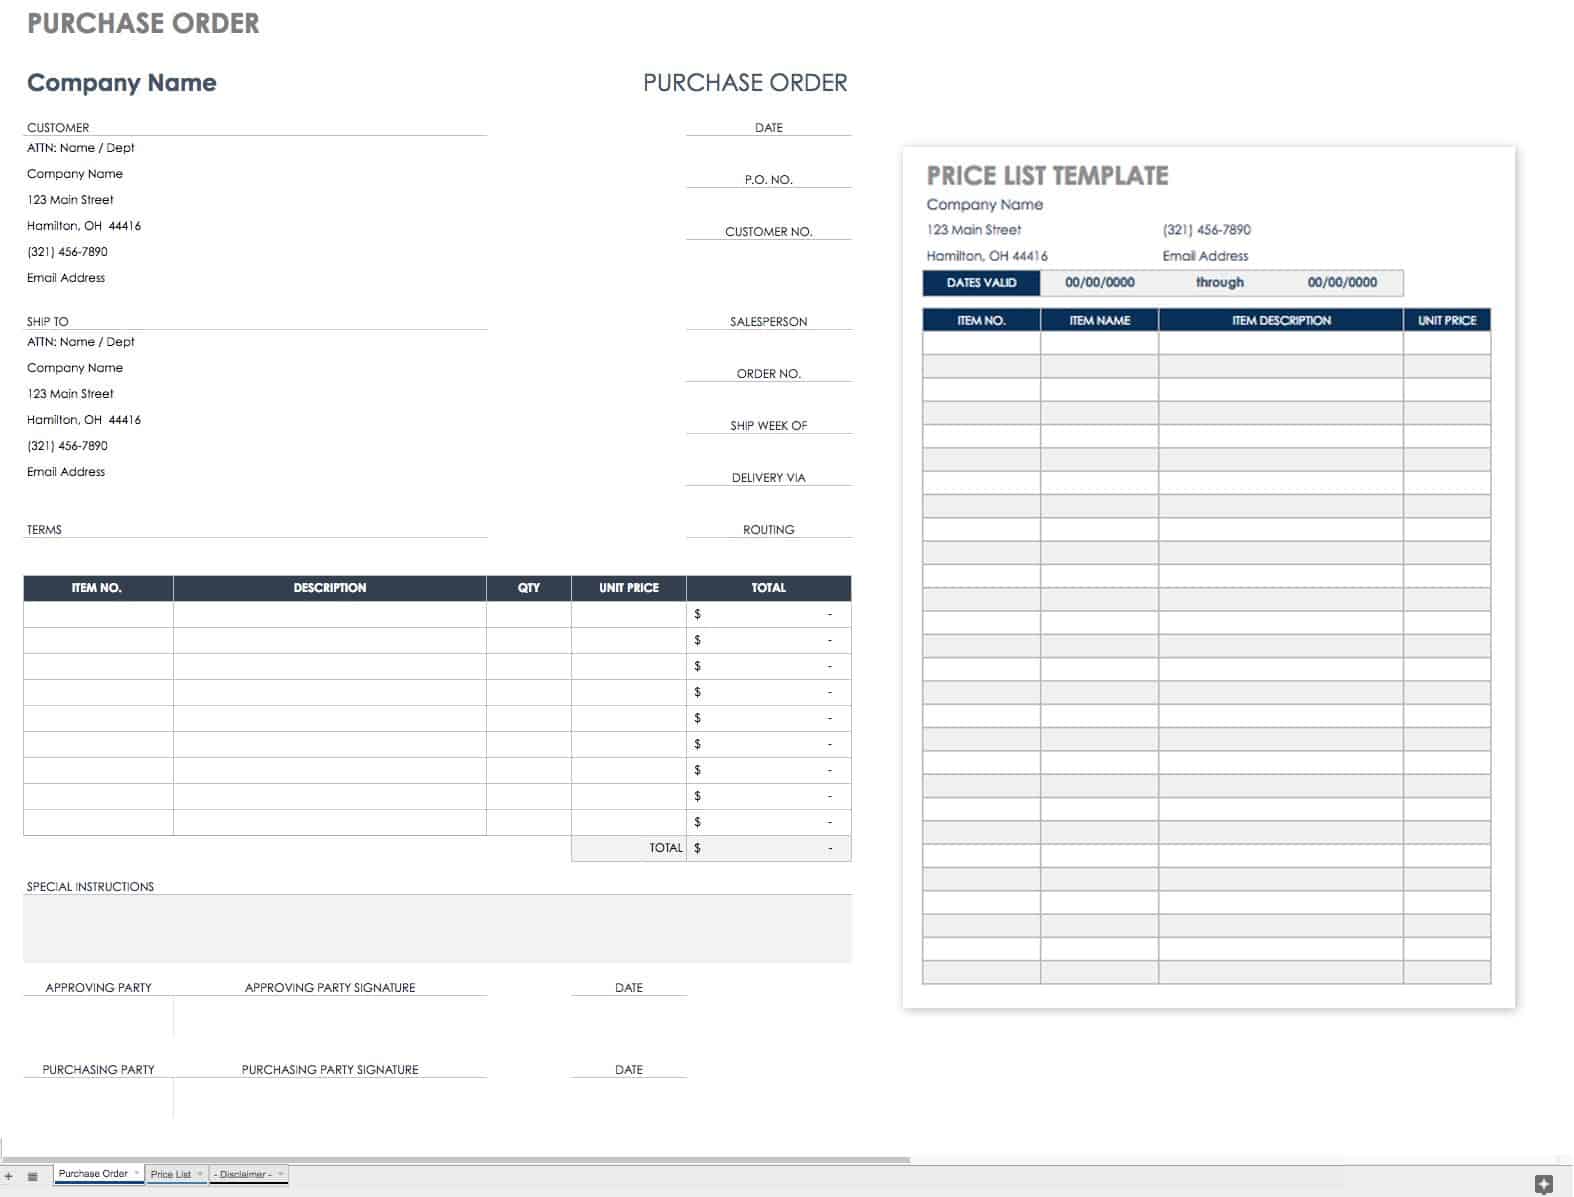 microsoft office purchase order template downloads